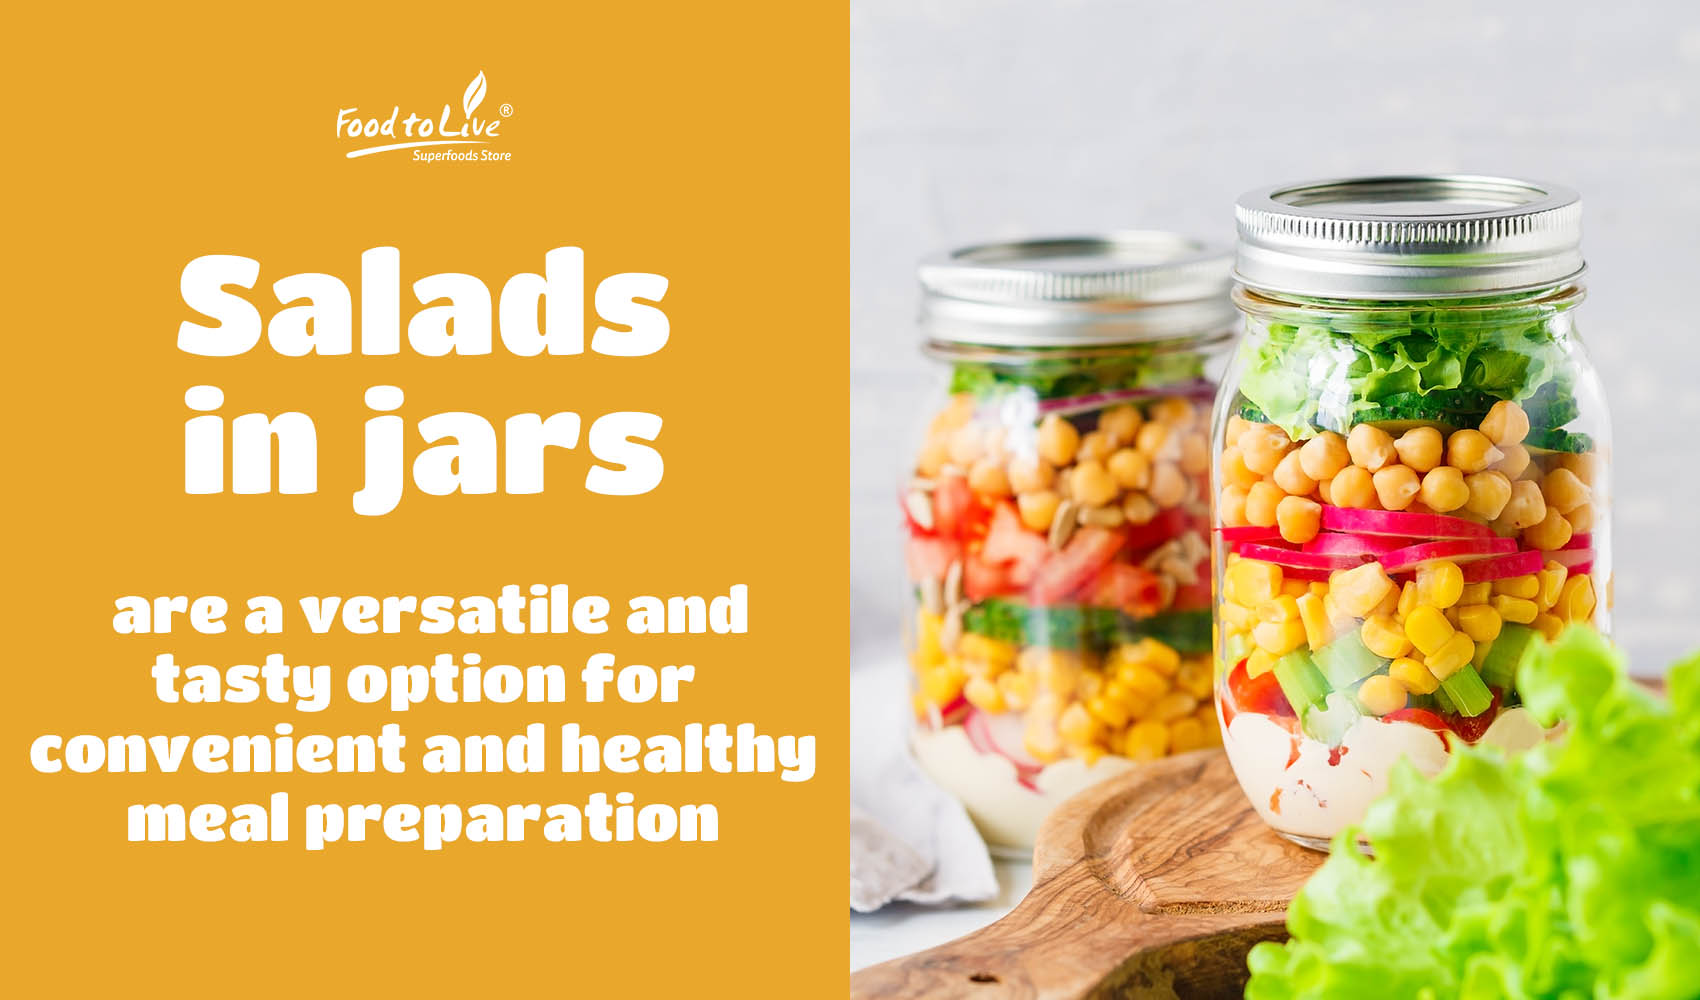 All-You-Need-to-Know-About-Jar-Salads-1 copy